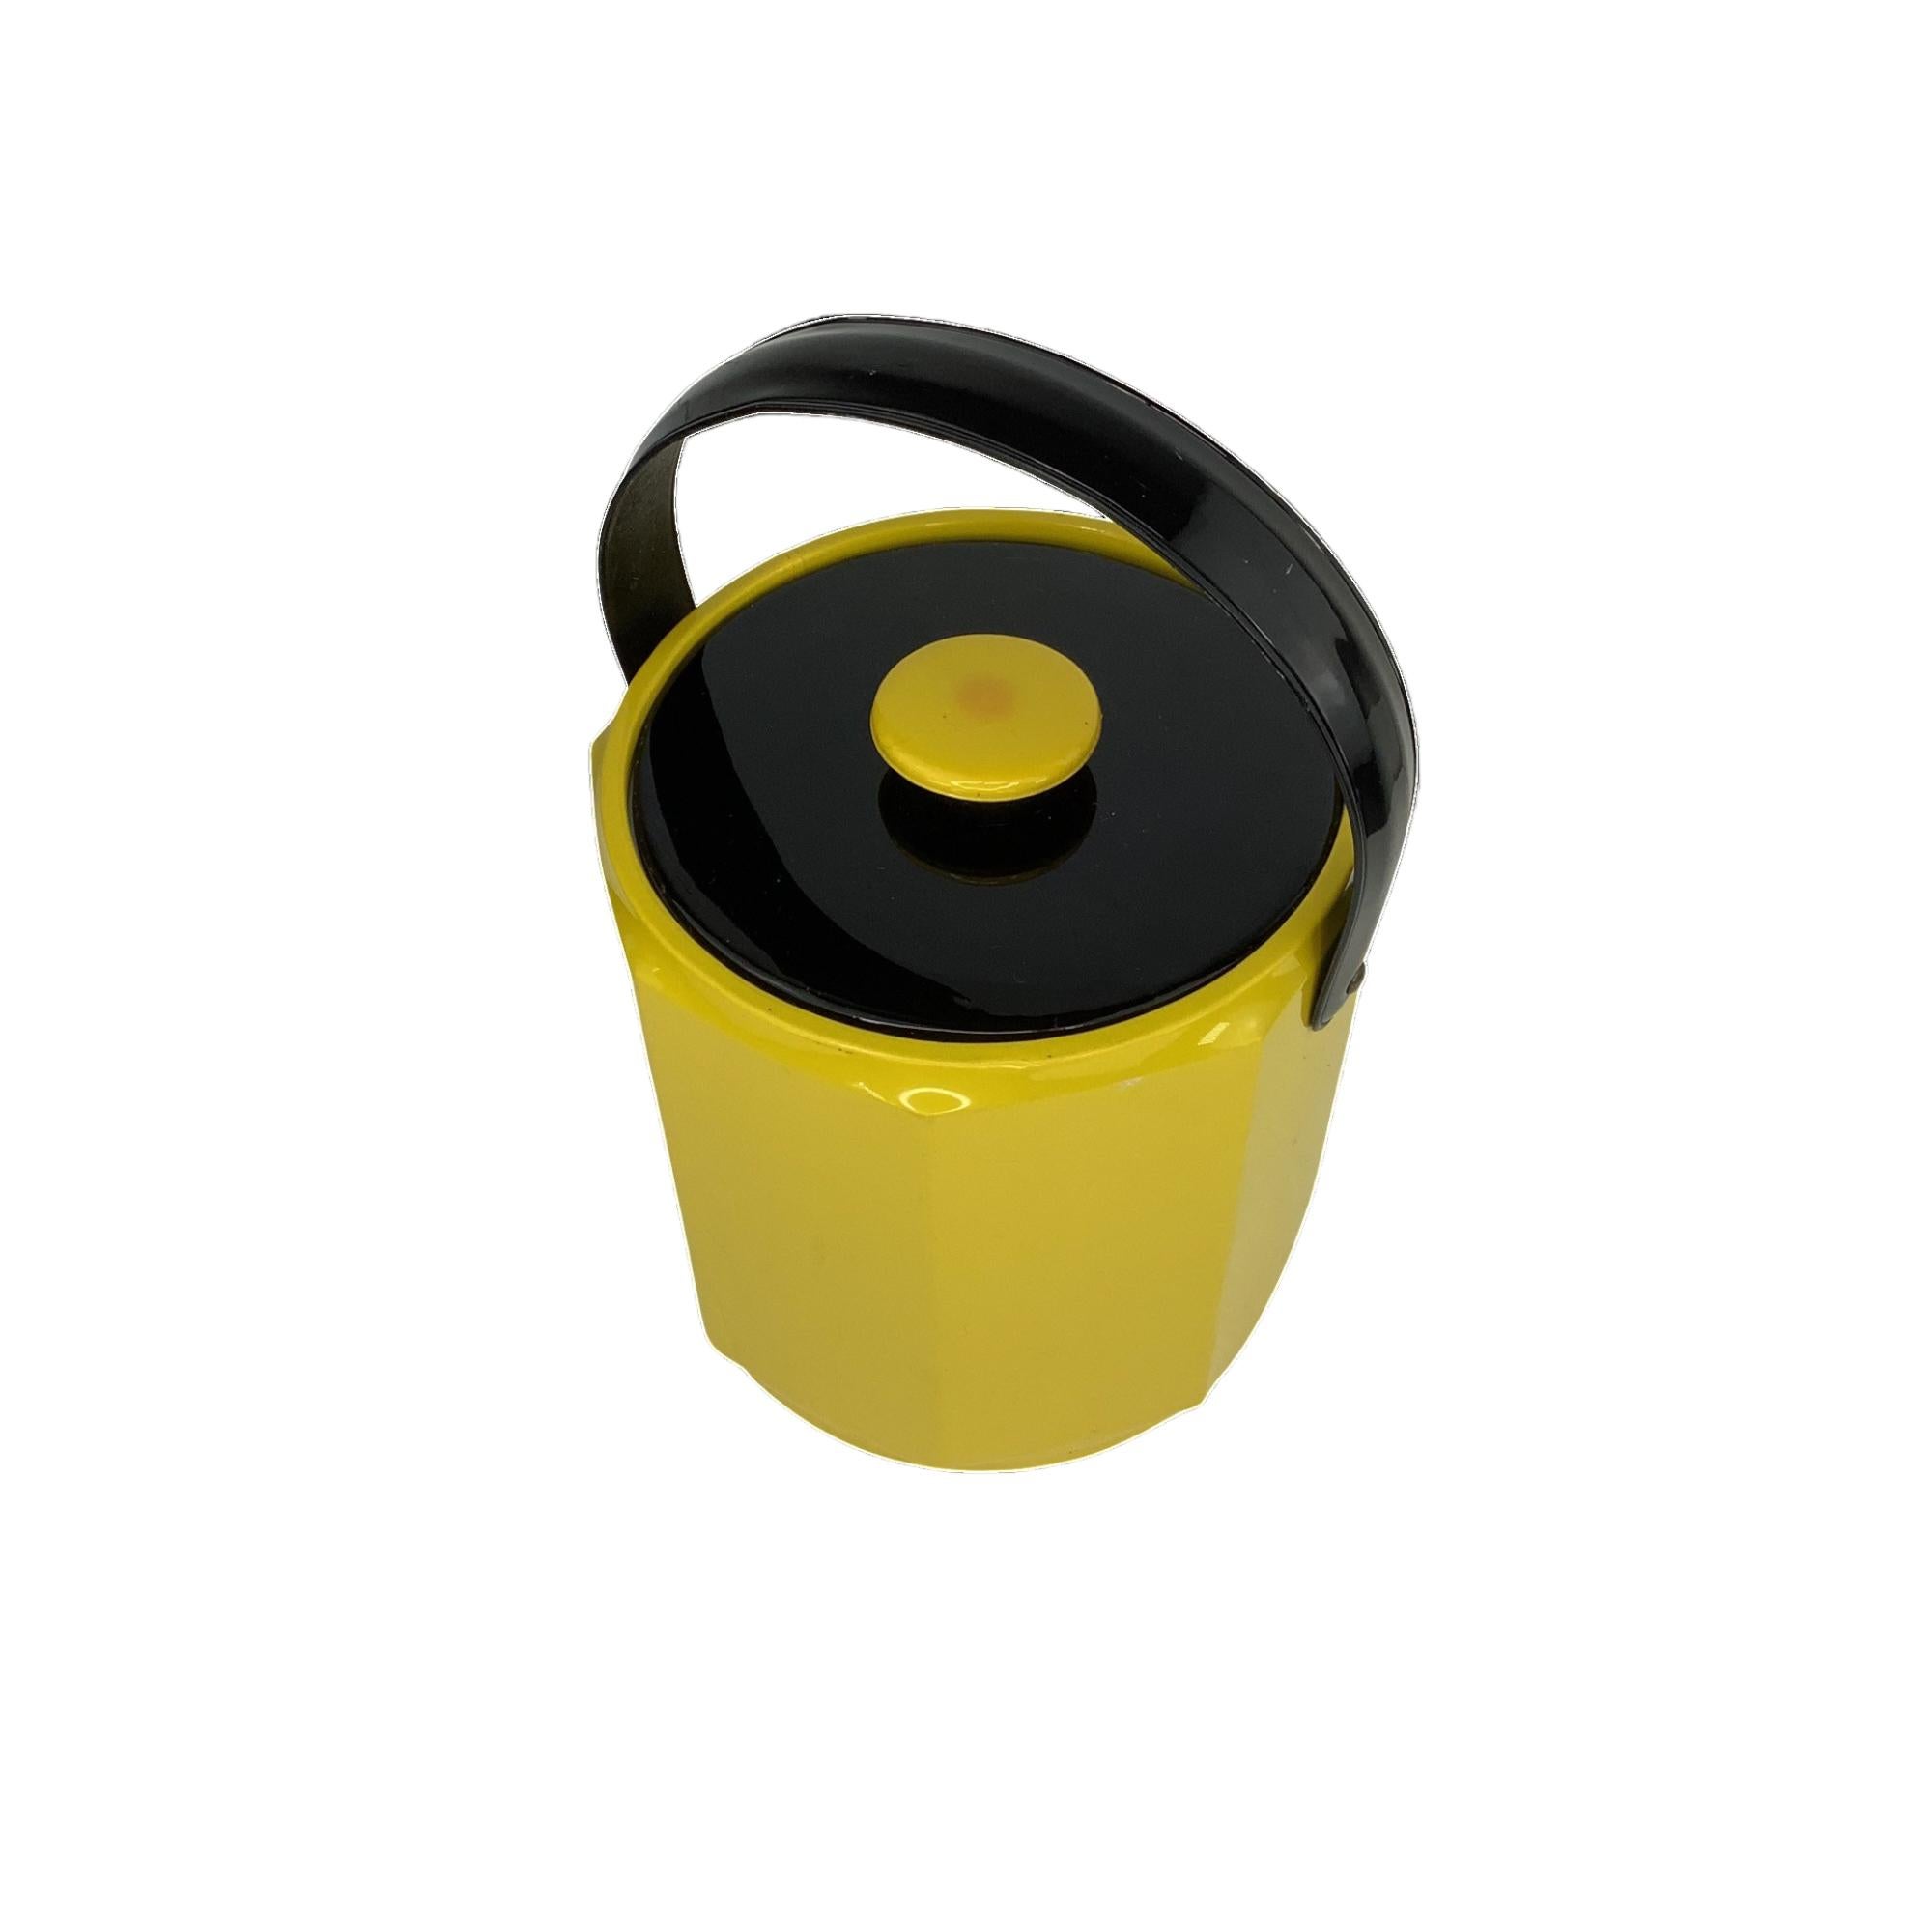 Vintage Hexagonal form Mid Century Vinyl Wrapped Ice Bucket in Vibrant Yellow and Black.